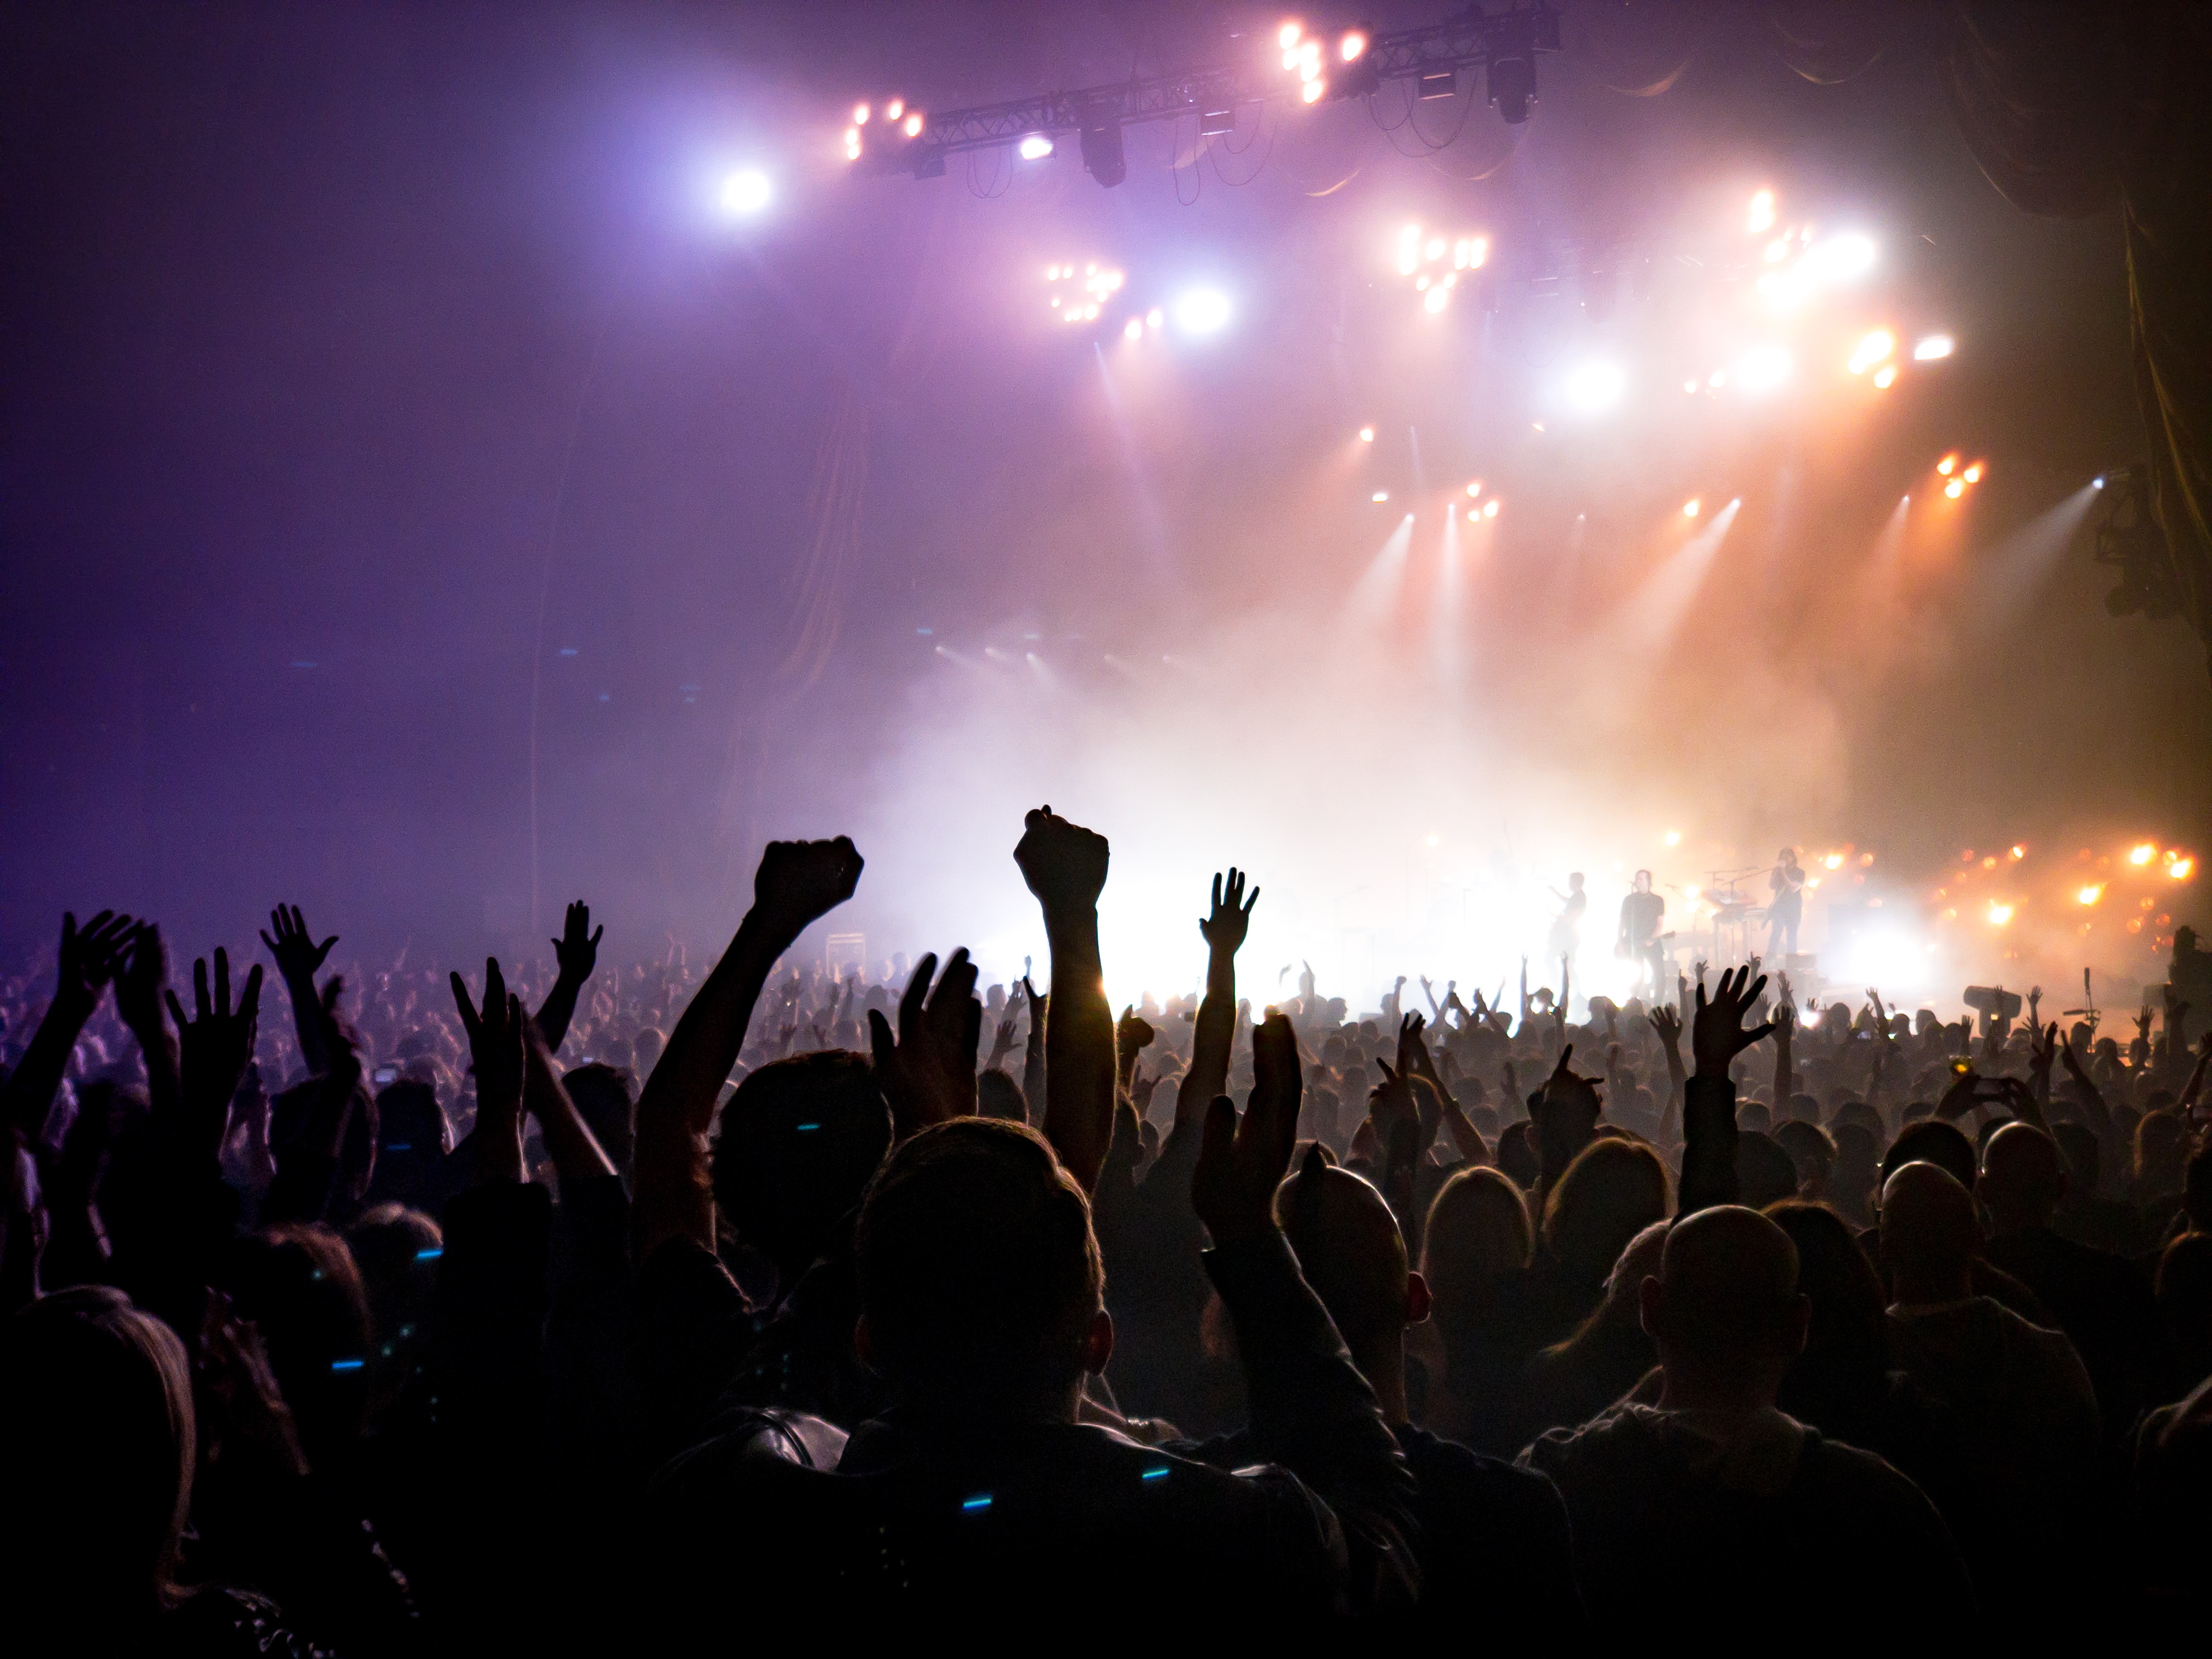 photo of audience raising hands at rock concert, Photo by ActionVance on Unsplash